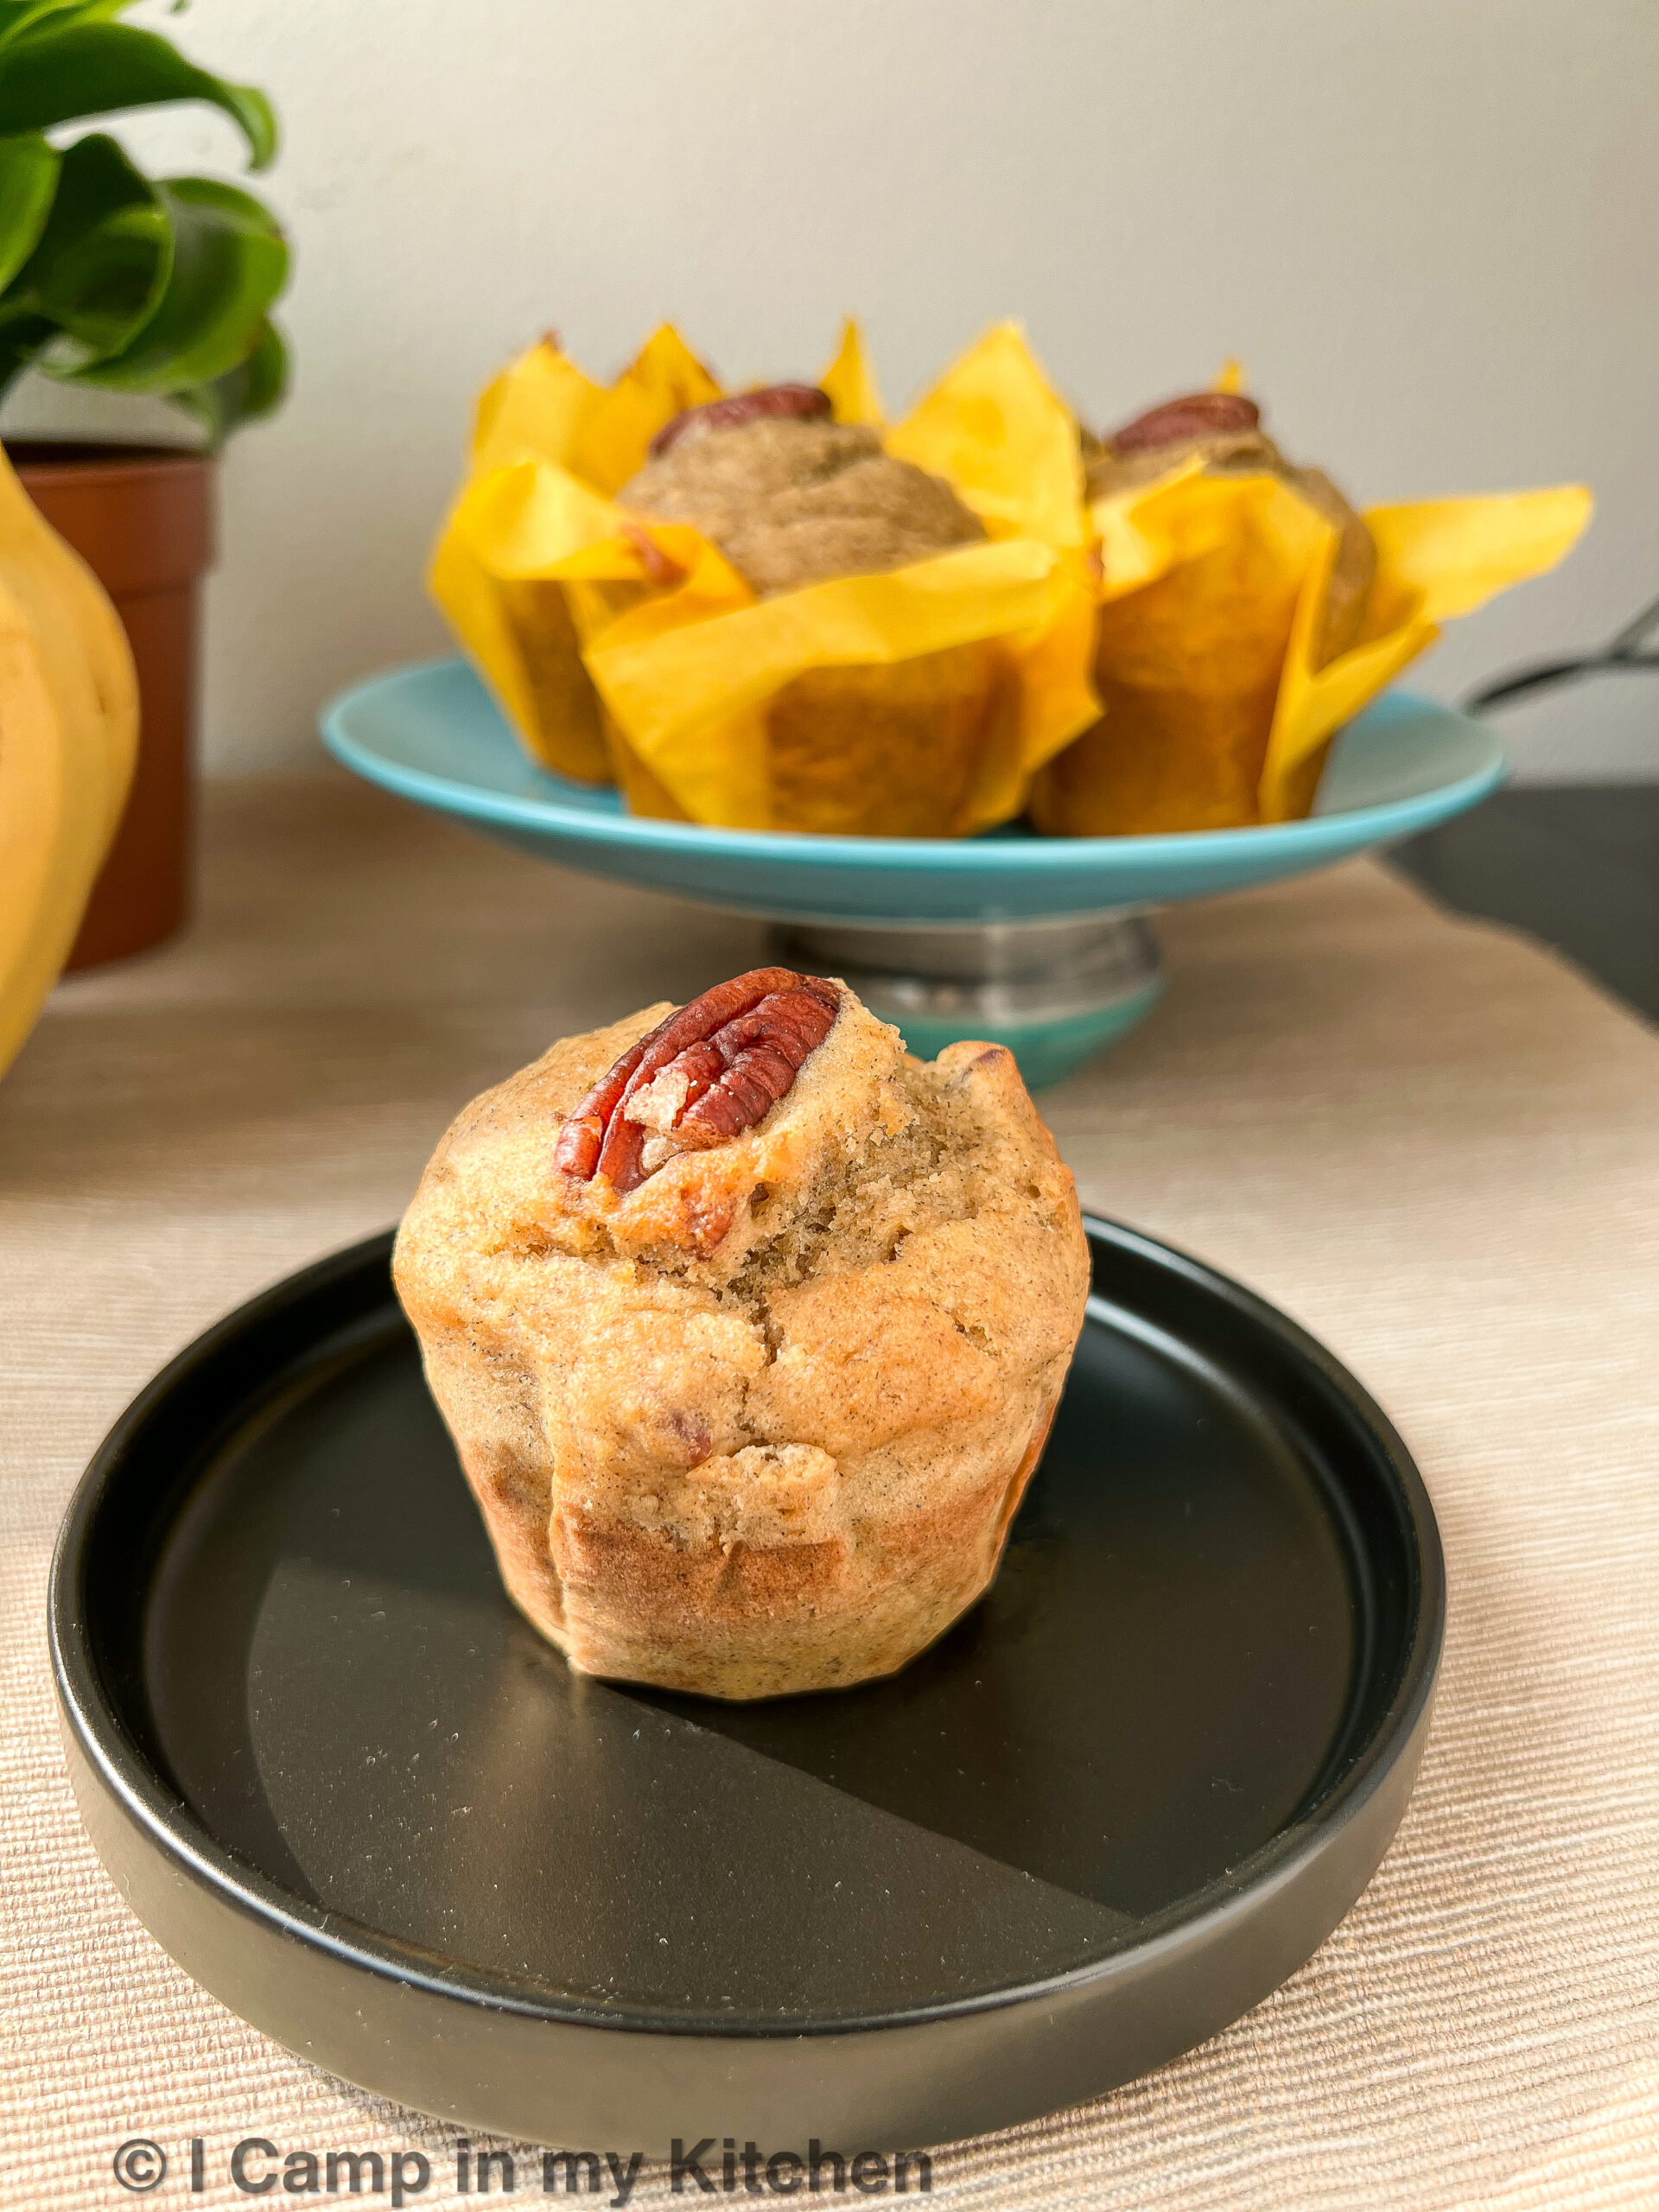 Fruit and nut muffins